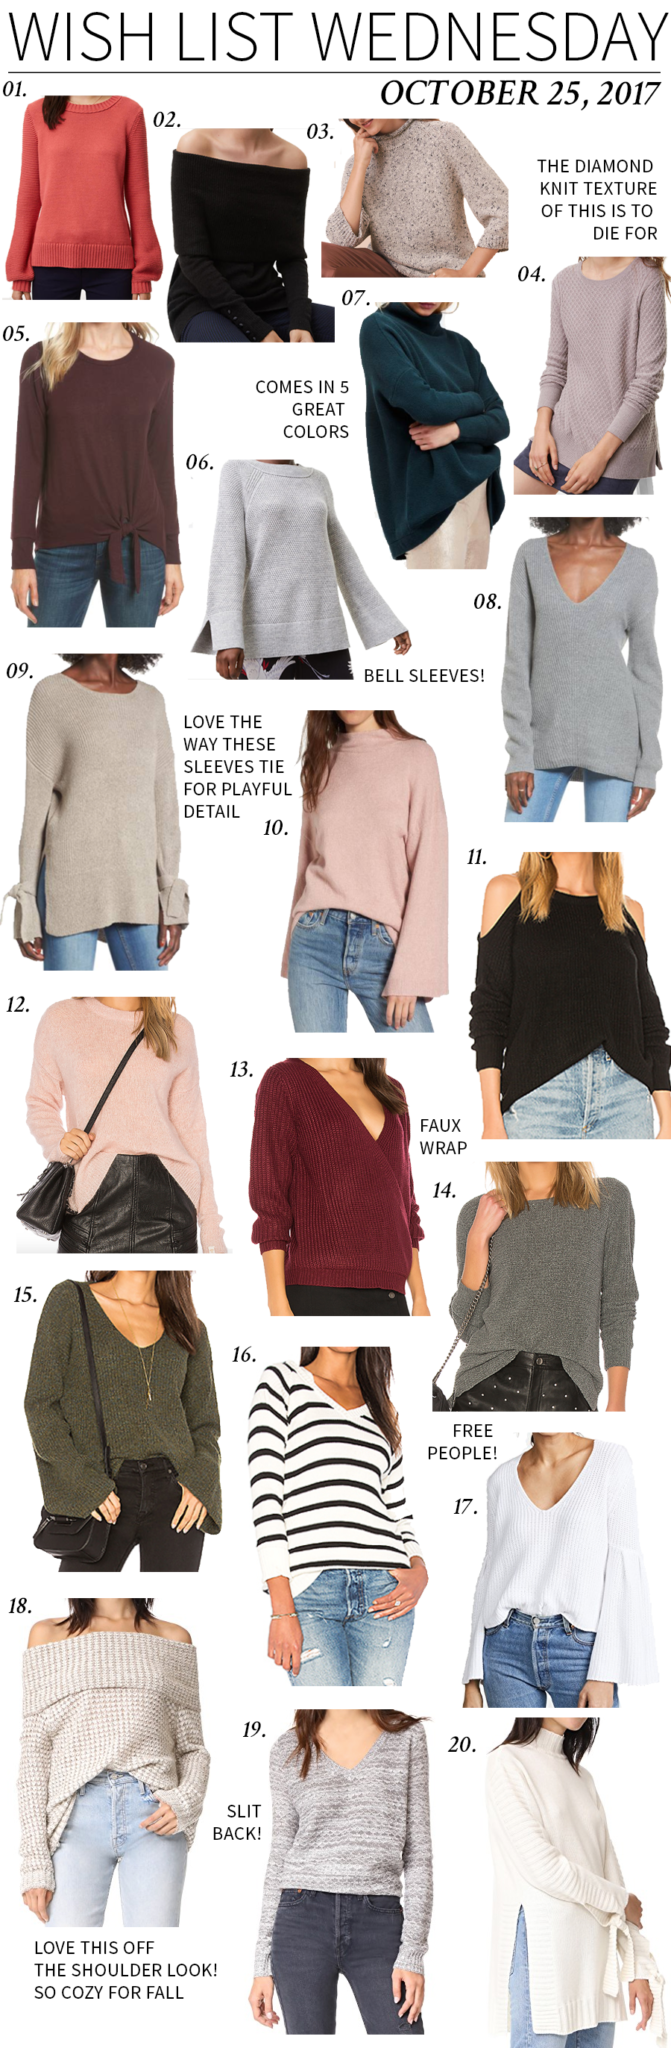 Wish List Wednesday, Fall, Sweaters, Tops